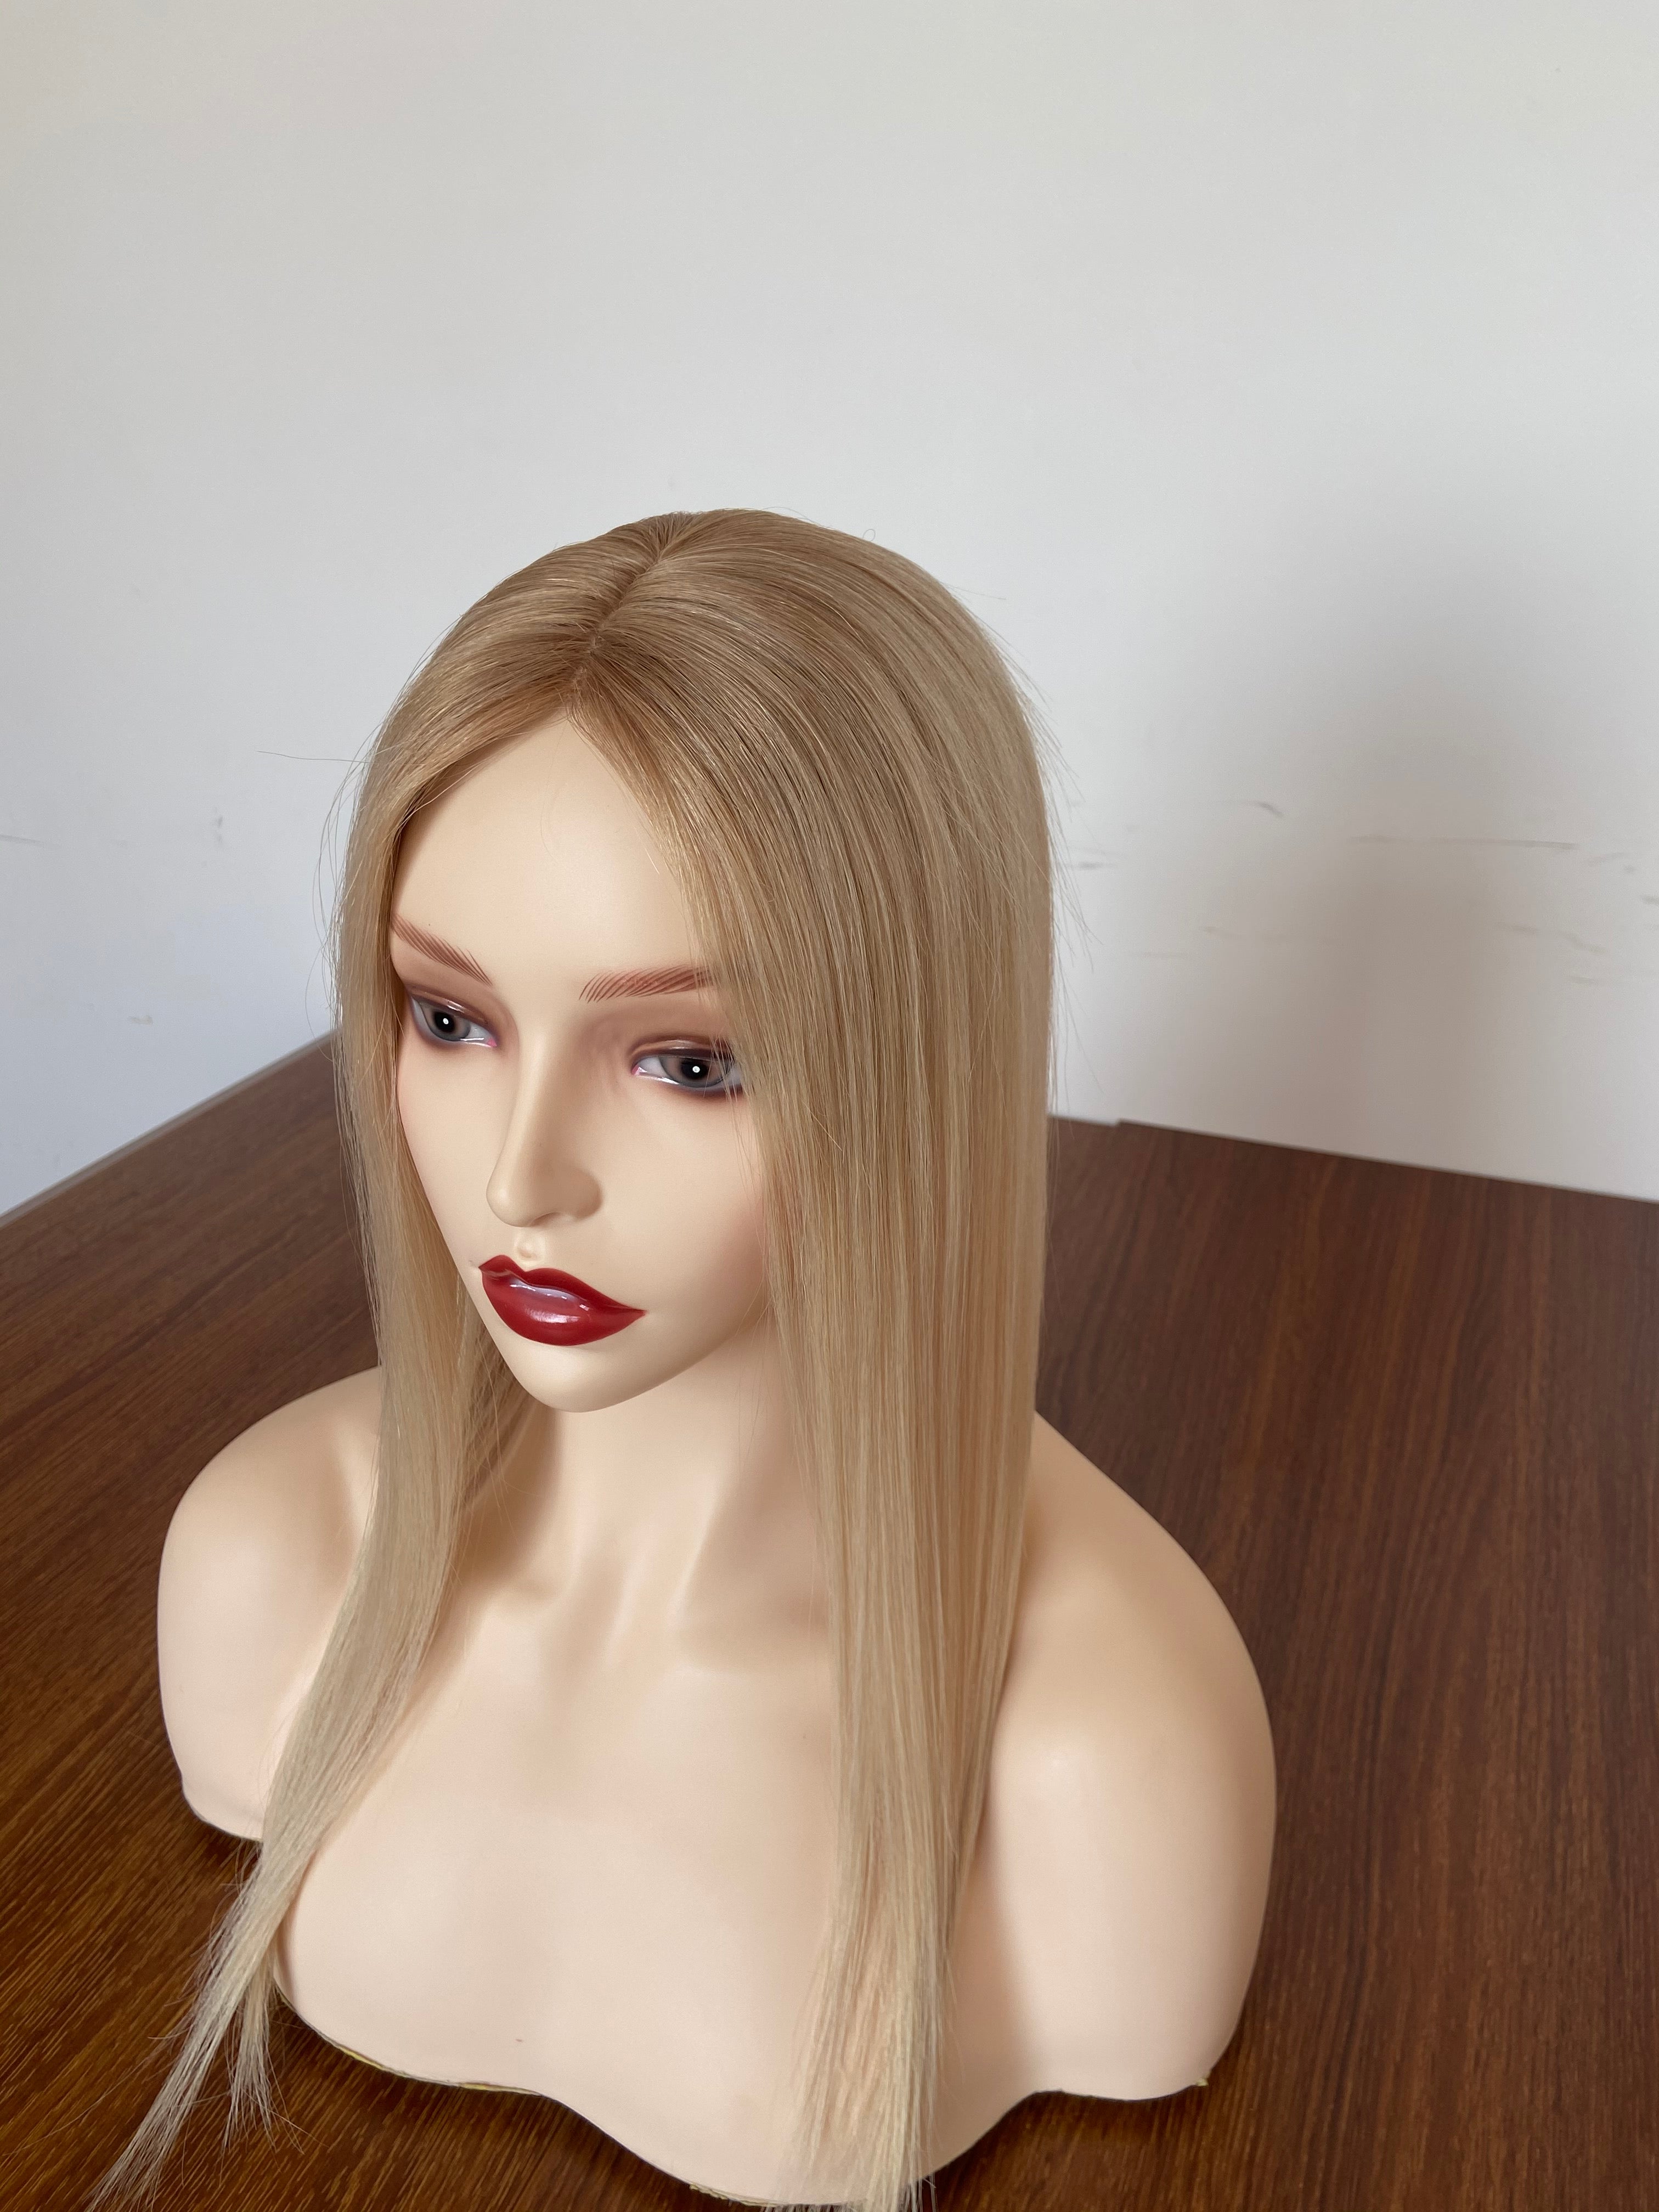 Hairpiece/topper platinum with a slightly dark base made of human hair